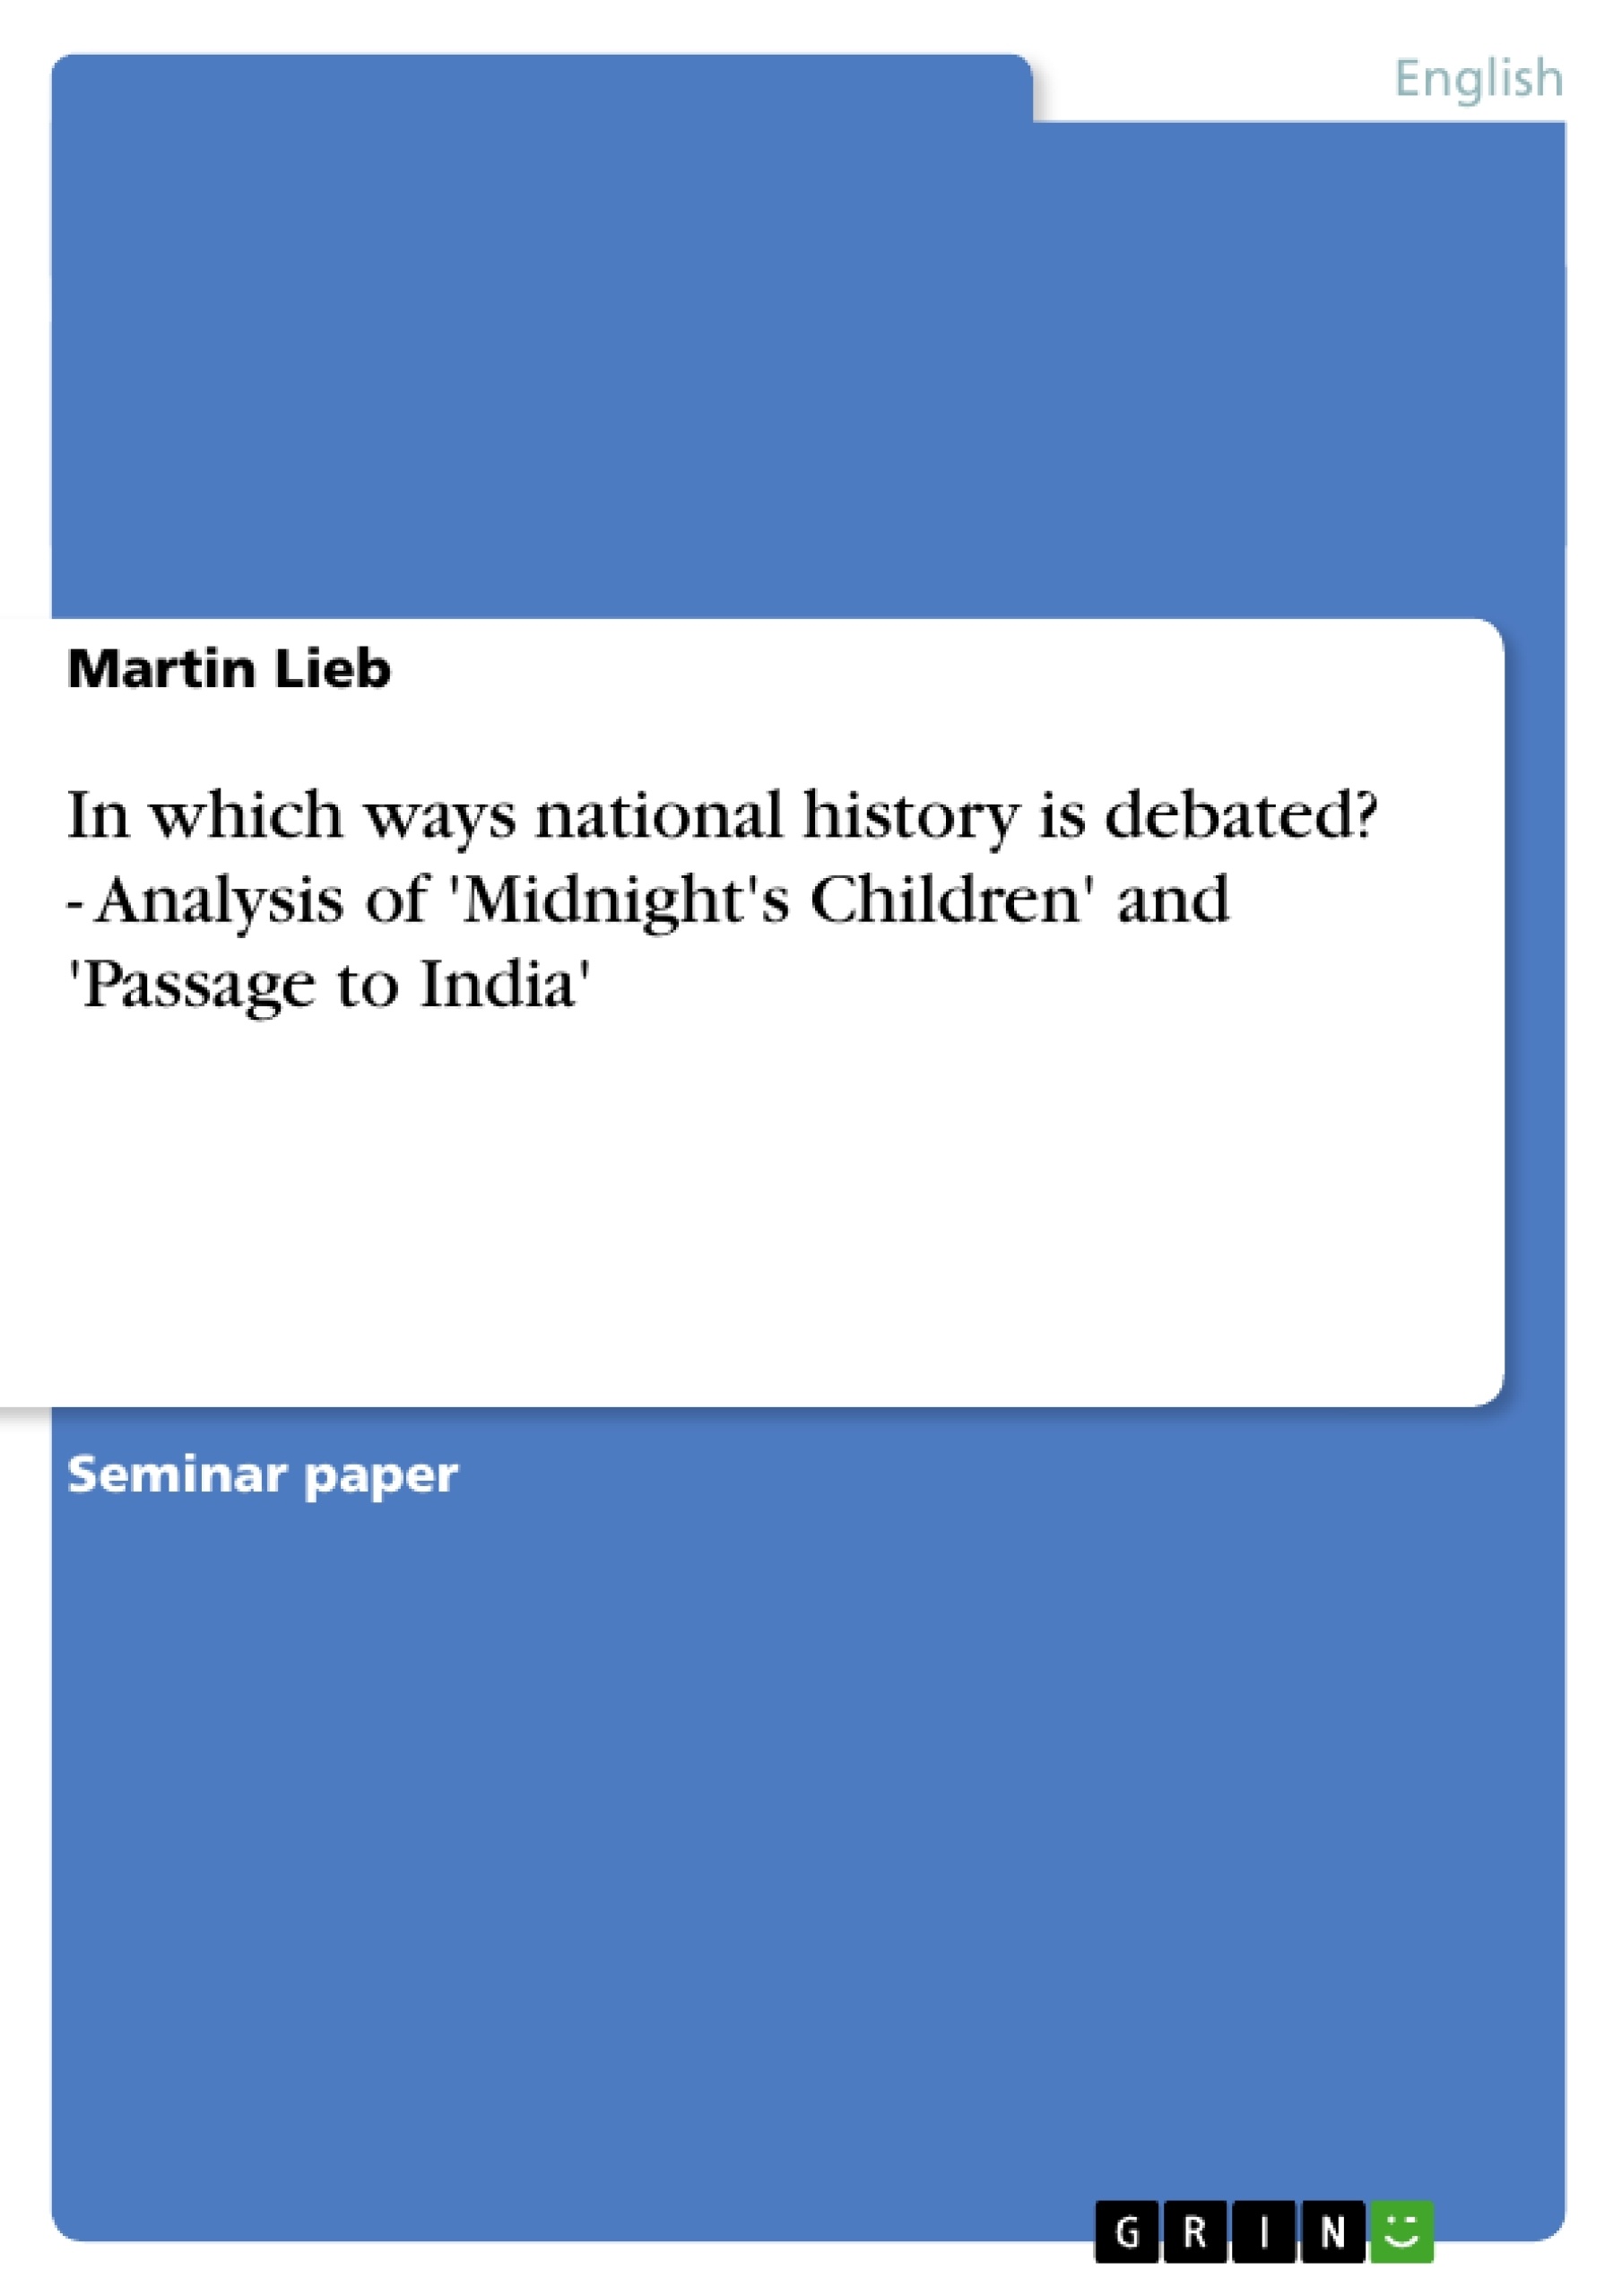 Titre: In which ways national history is debated? - Analysis of 'Midnight's Children' and 'Passage to India'